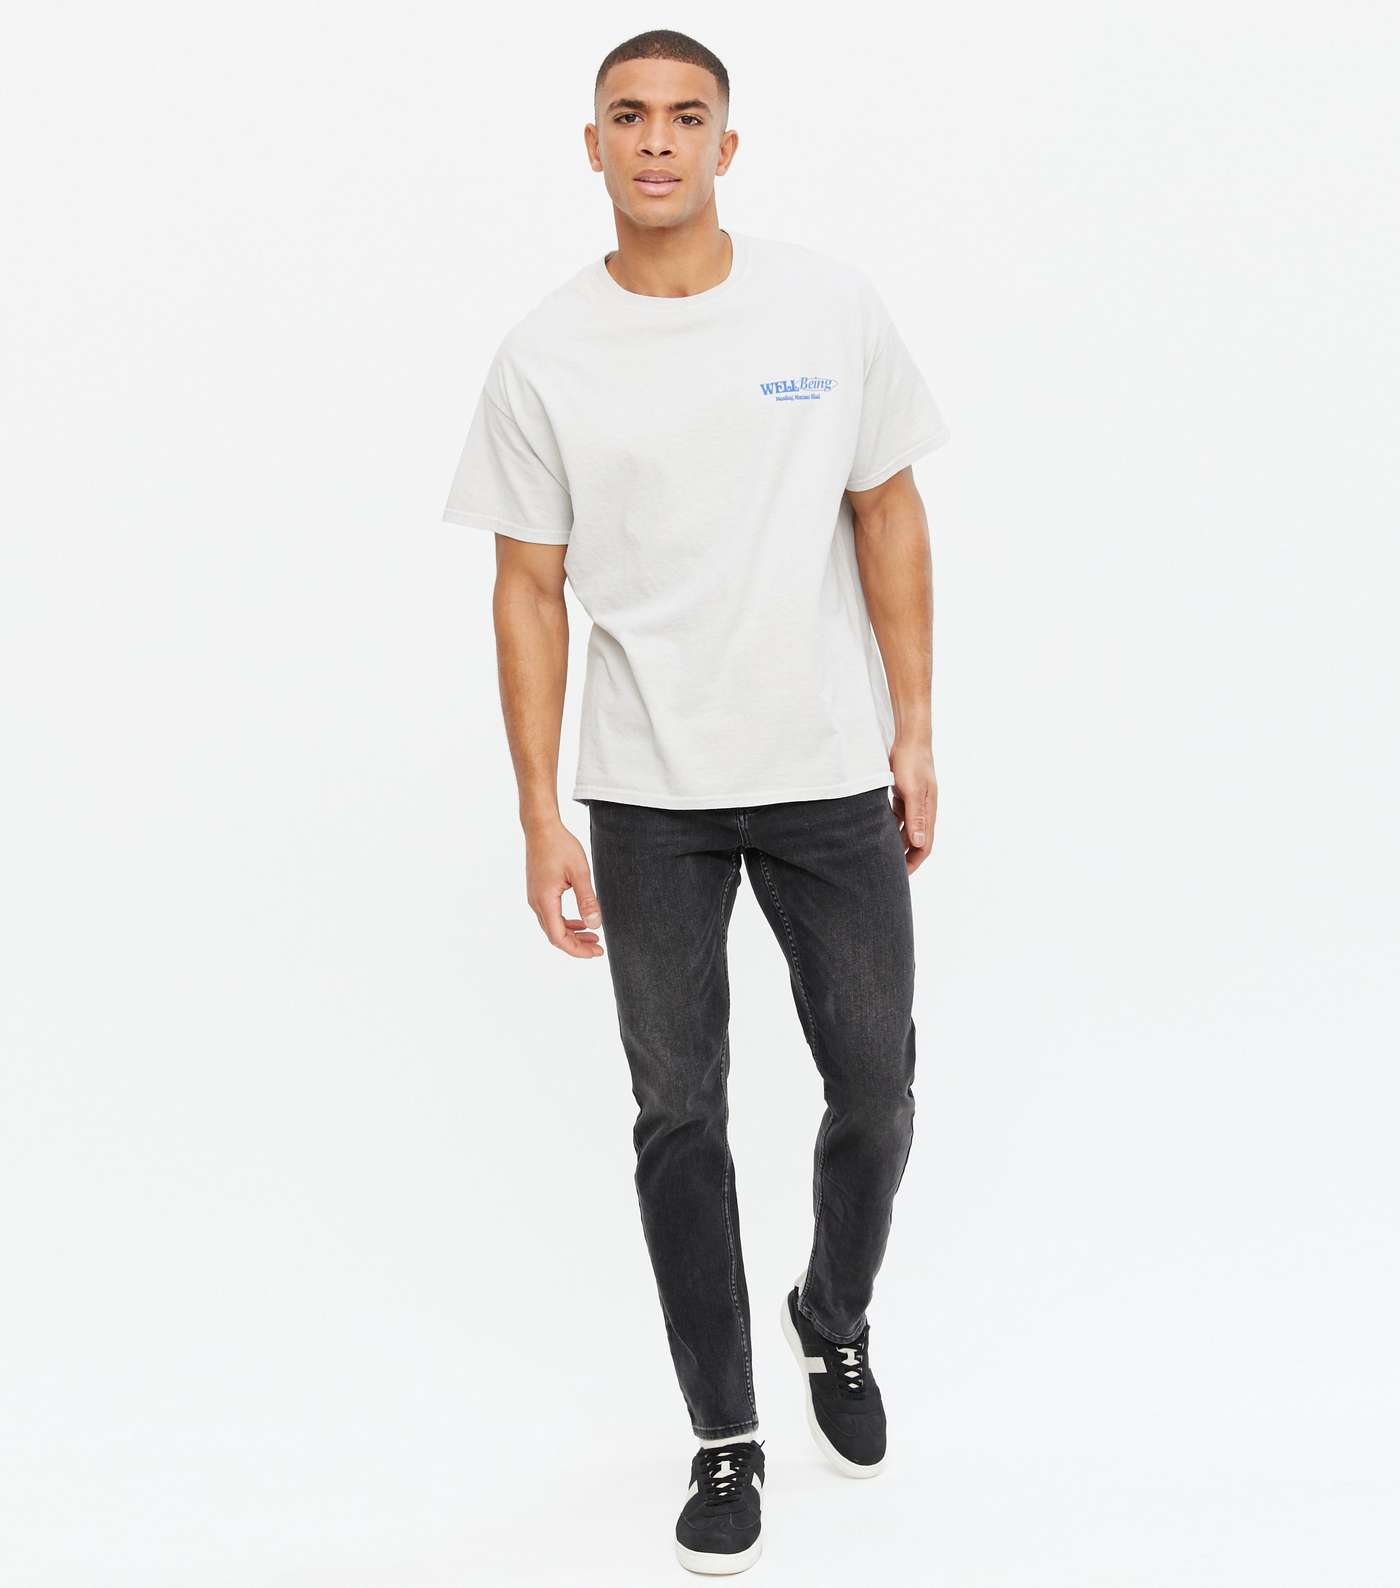 Off White Overdyed Well Being Logo T-Shirt Image 2